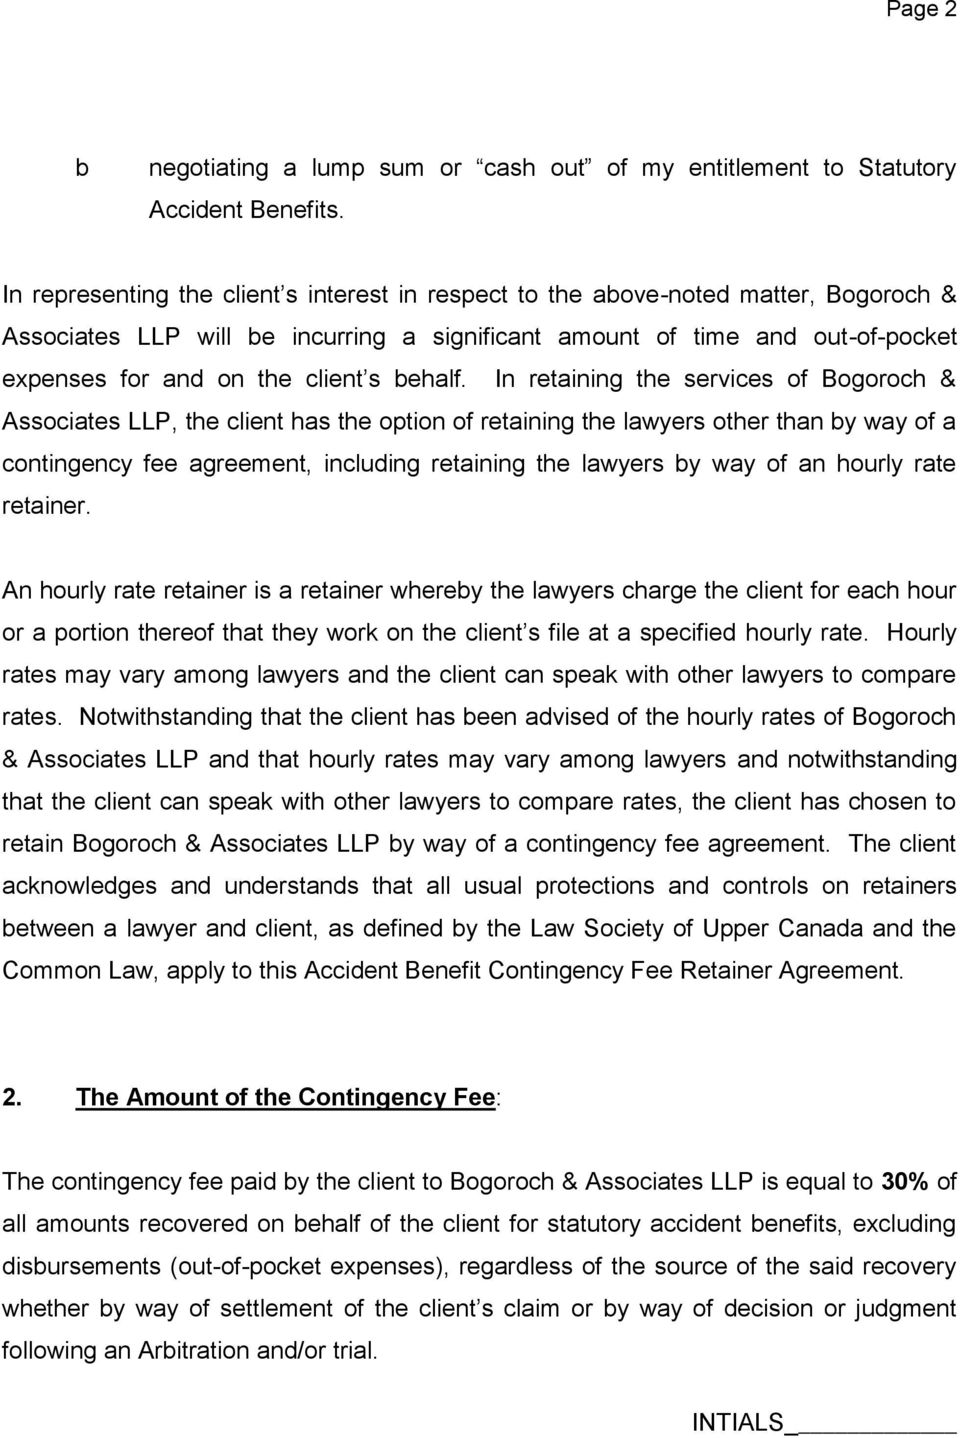 ACCIDENT BENEFIT CONTINGENCY FEE RETAINER AGREEMENT - PDF Free Inside contingency fee agreement template